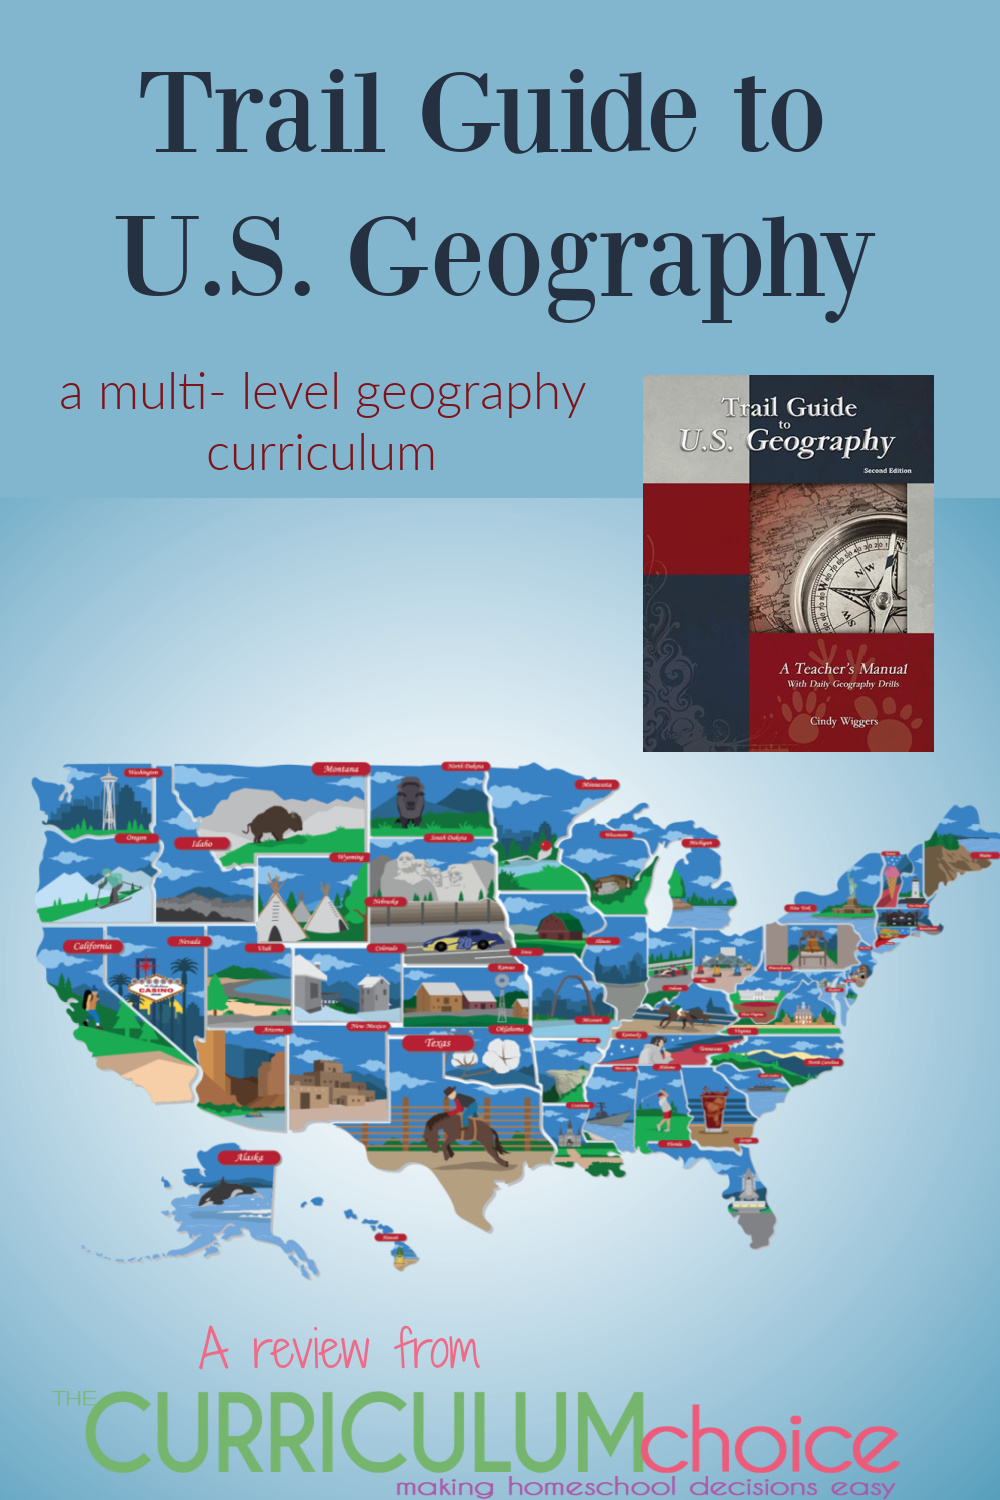 Trail Guide to U.S. Geography is a family-friendly, multi-level, homeschool geography curriculum guide for students in grades 3 through 12.  A review from The Curriculum Choice